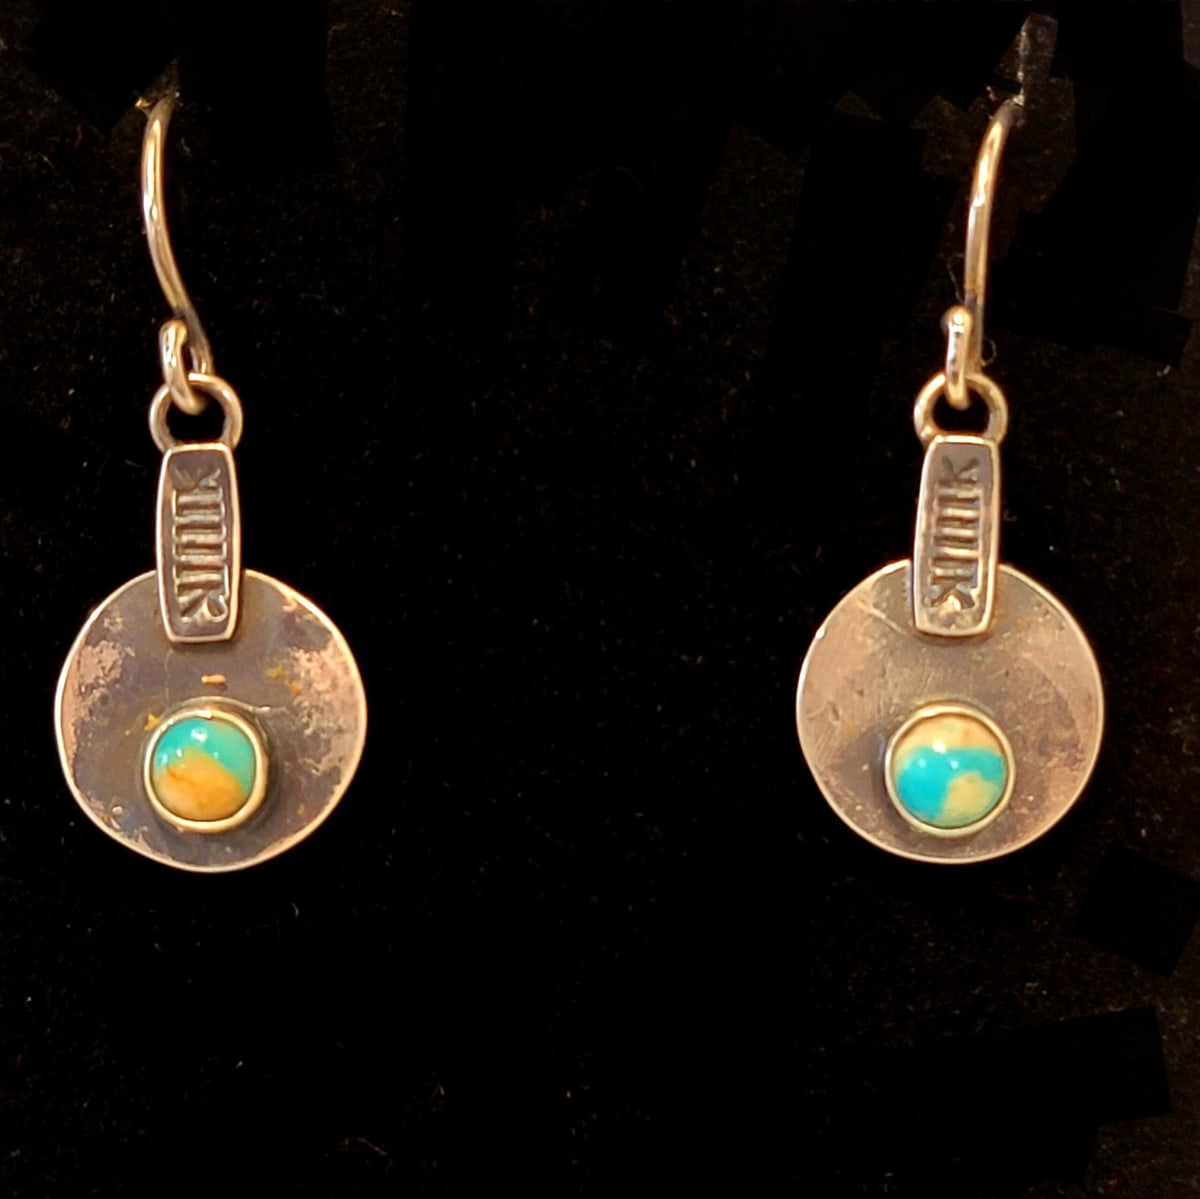 "Nothing Barred Earrings" - Rustic Tribal Hand Stamped Mona Lisa Turquoise French Wire Earrings by Shasta Brooks  Image: All Art © Shasta Brooks Studio LLC